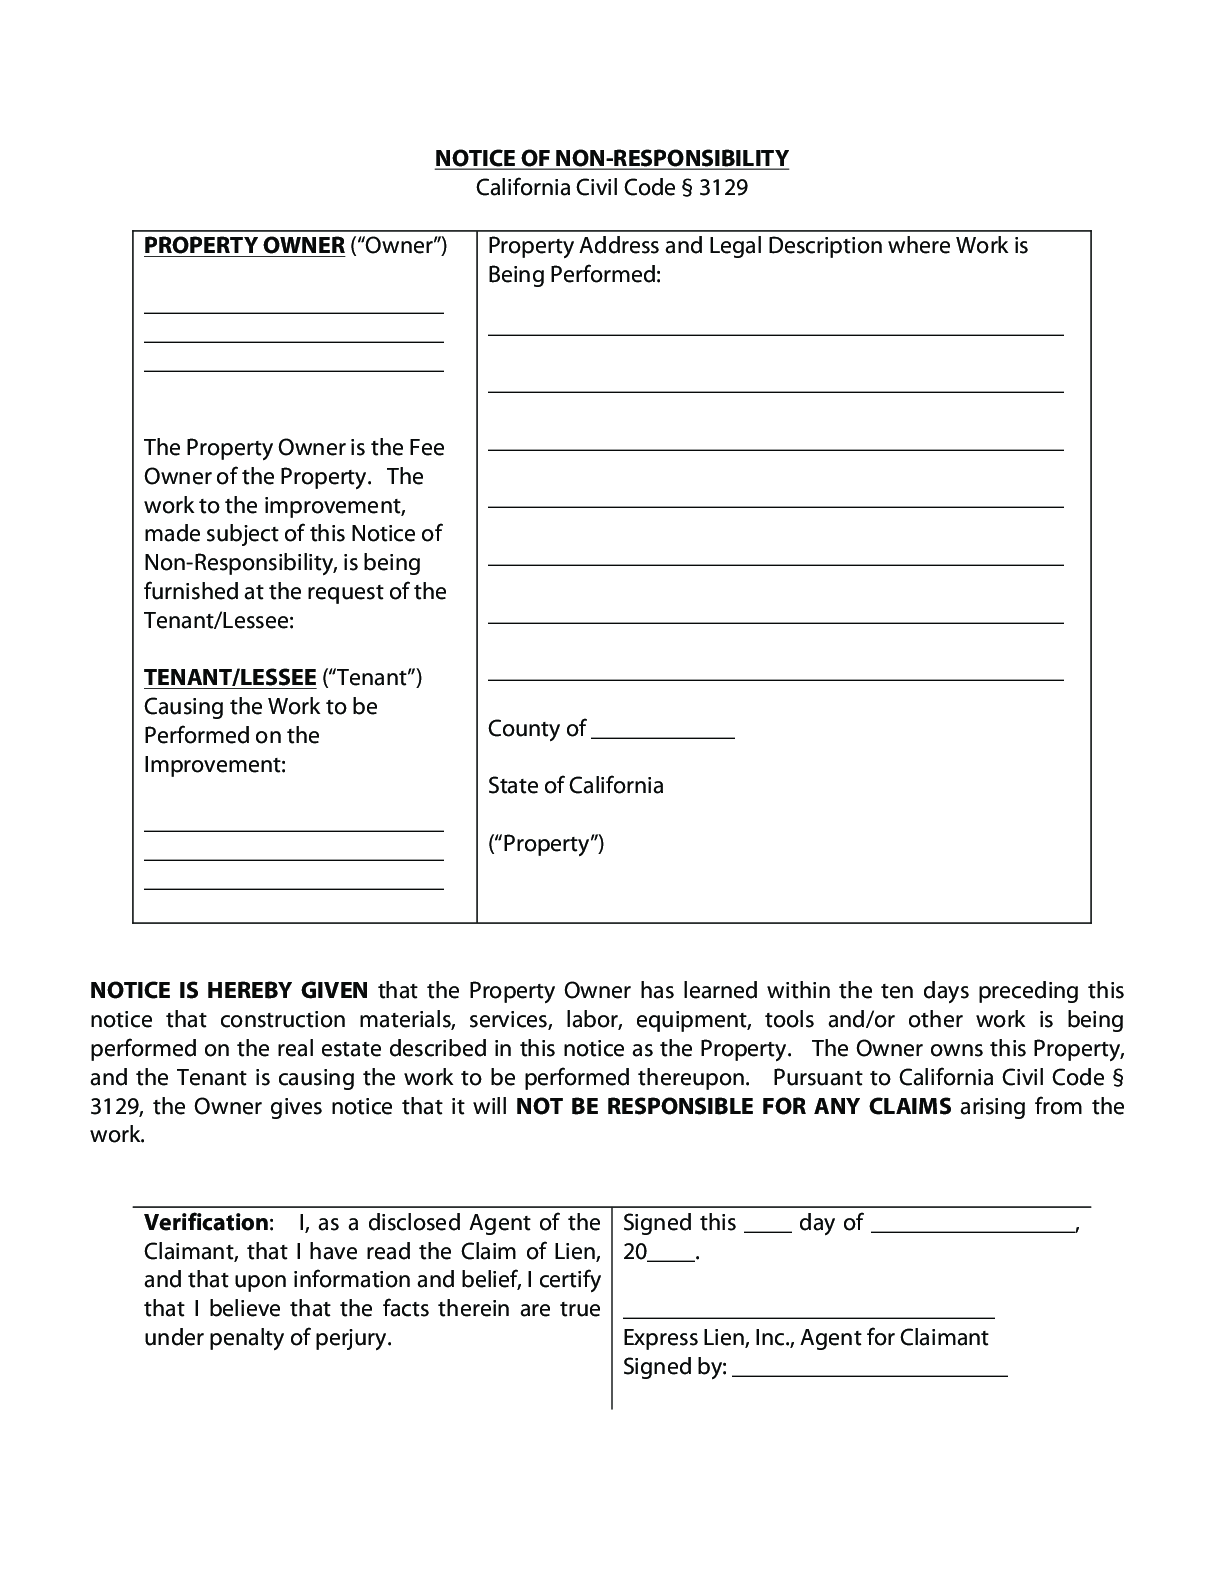 California Notice of Non-Responsibility Form - free from